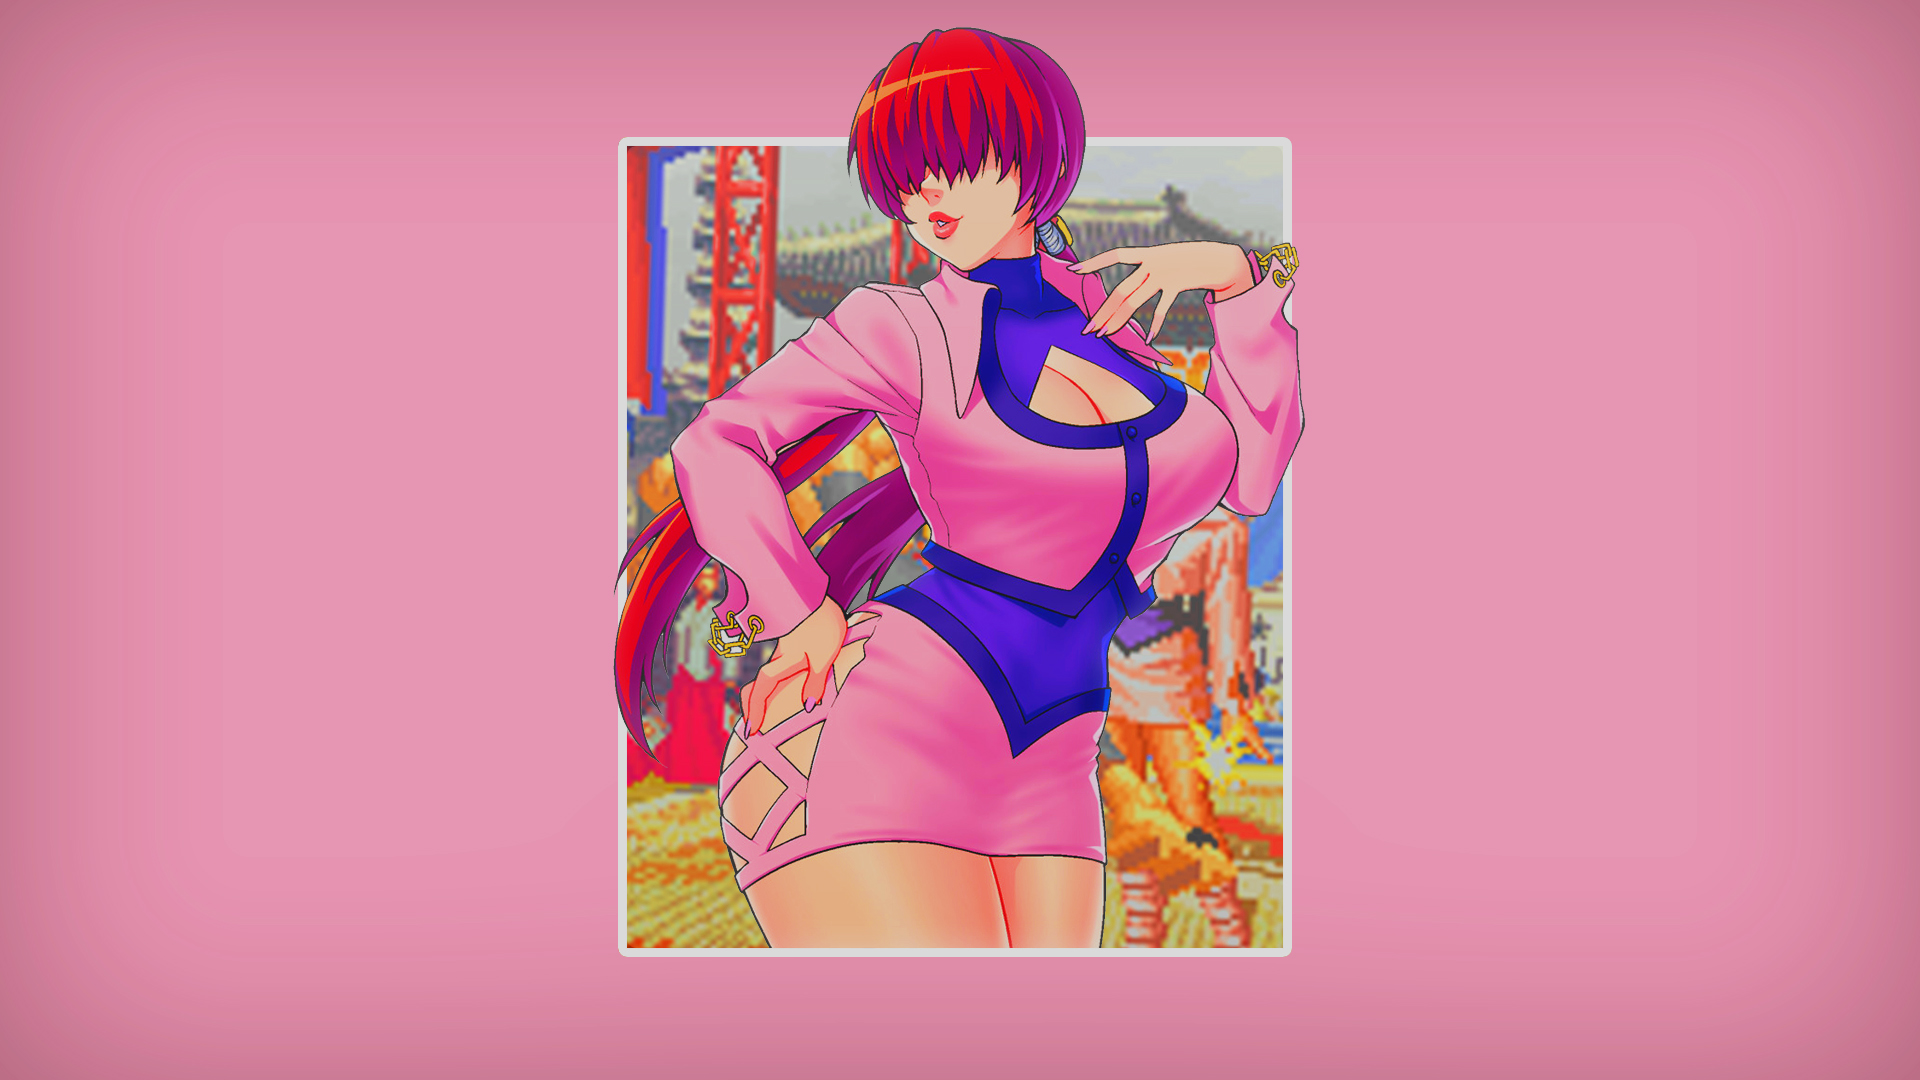 Anime 1920x1080 anime anime girls picture-in-picture simple background pixel art King of Fighters Shermie cleavage thick body big boobs